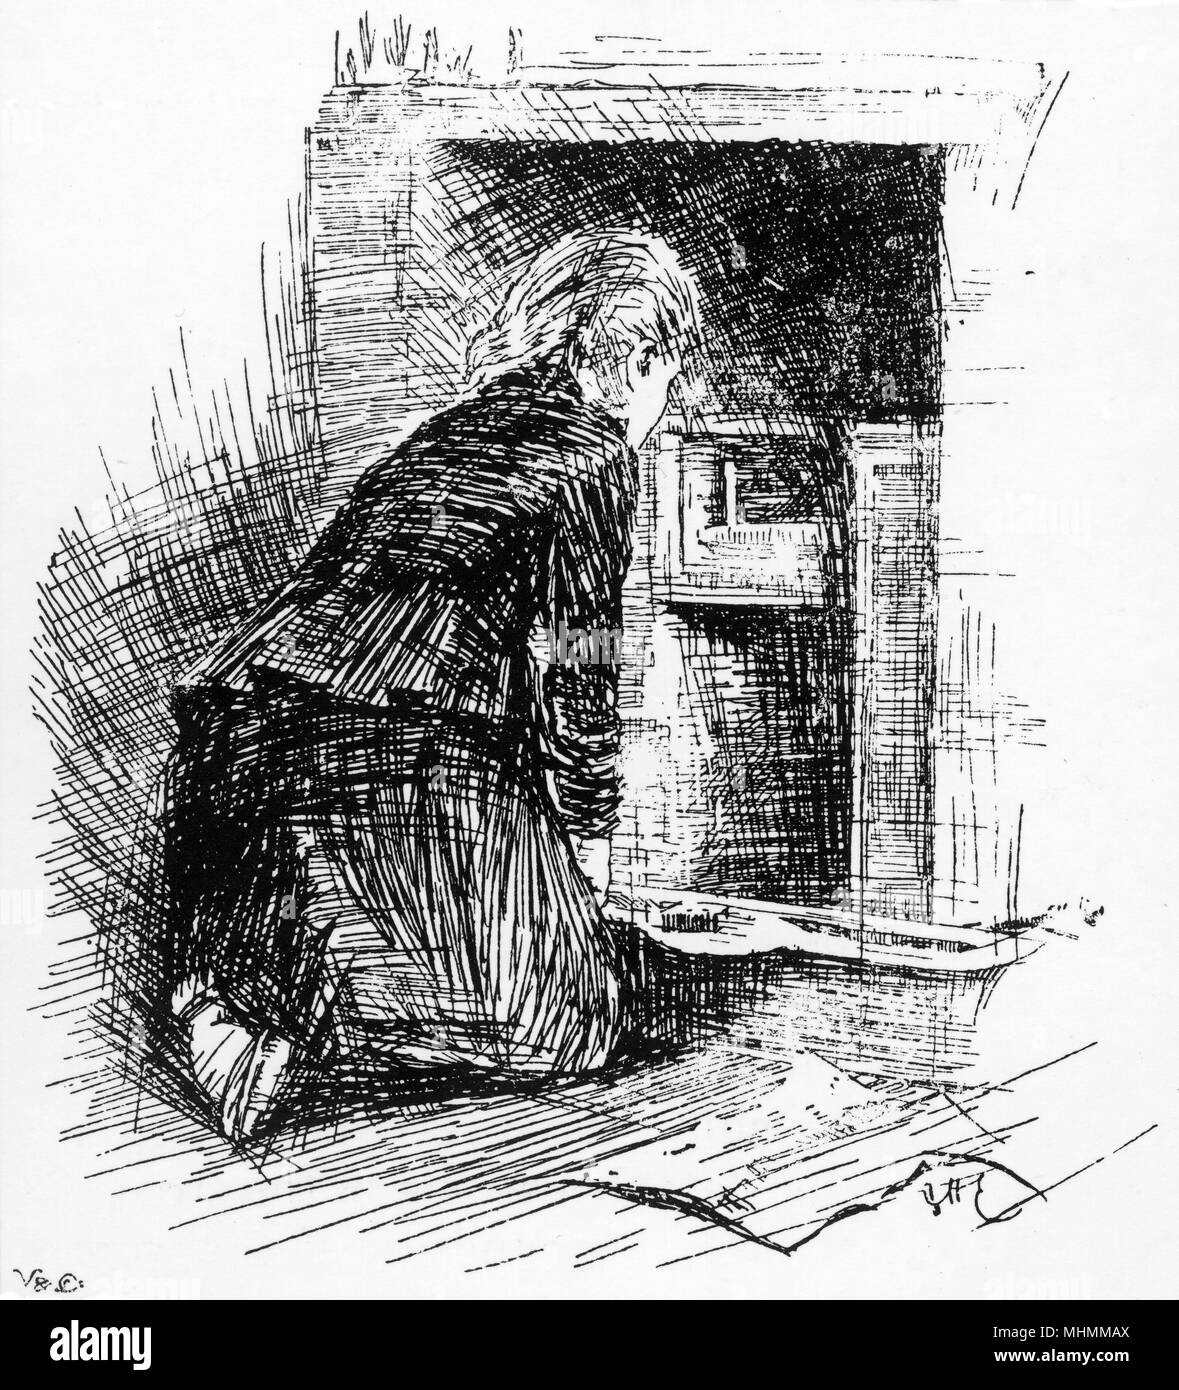 A woman, perhaps a maid, lights a fire in the grate early in the morning       Date: 1895 Stock Photo